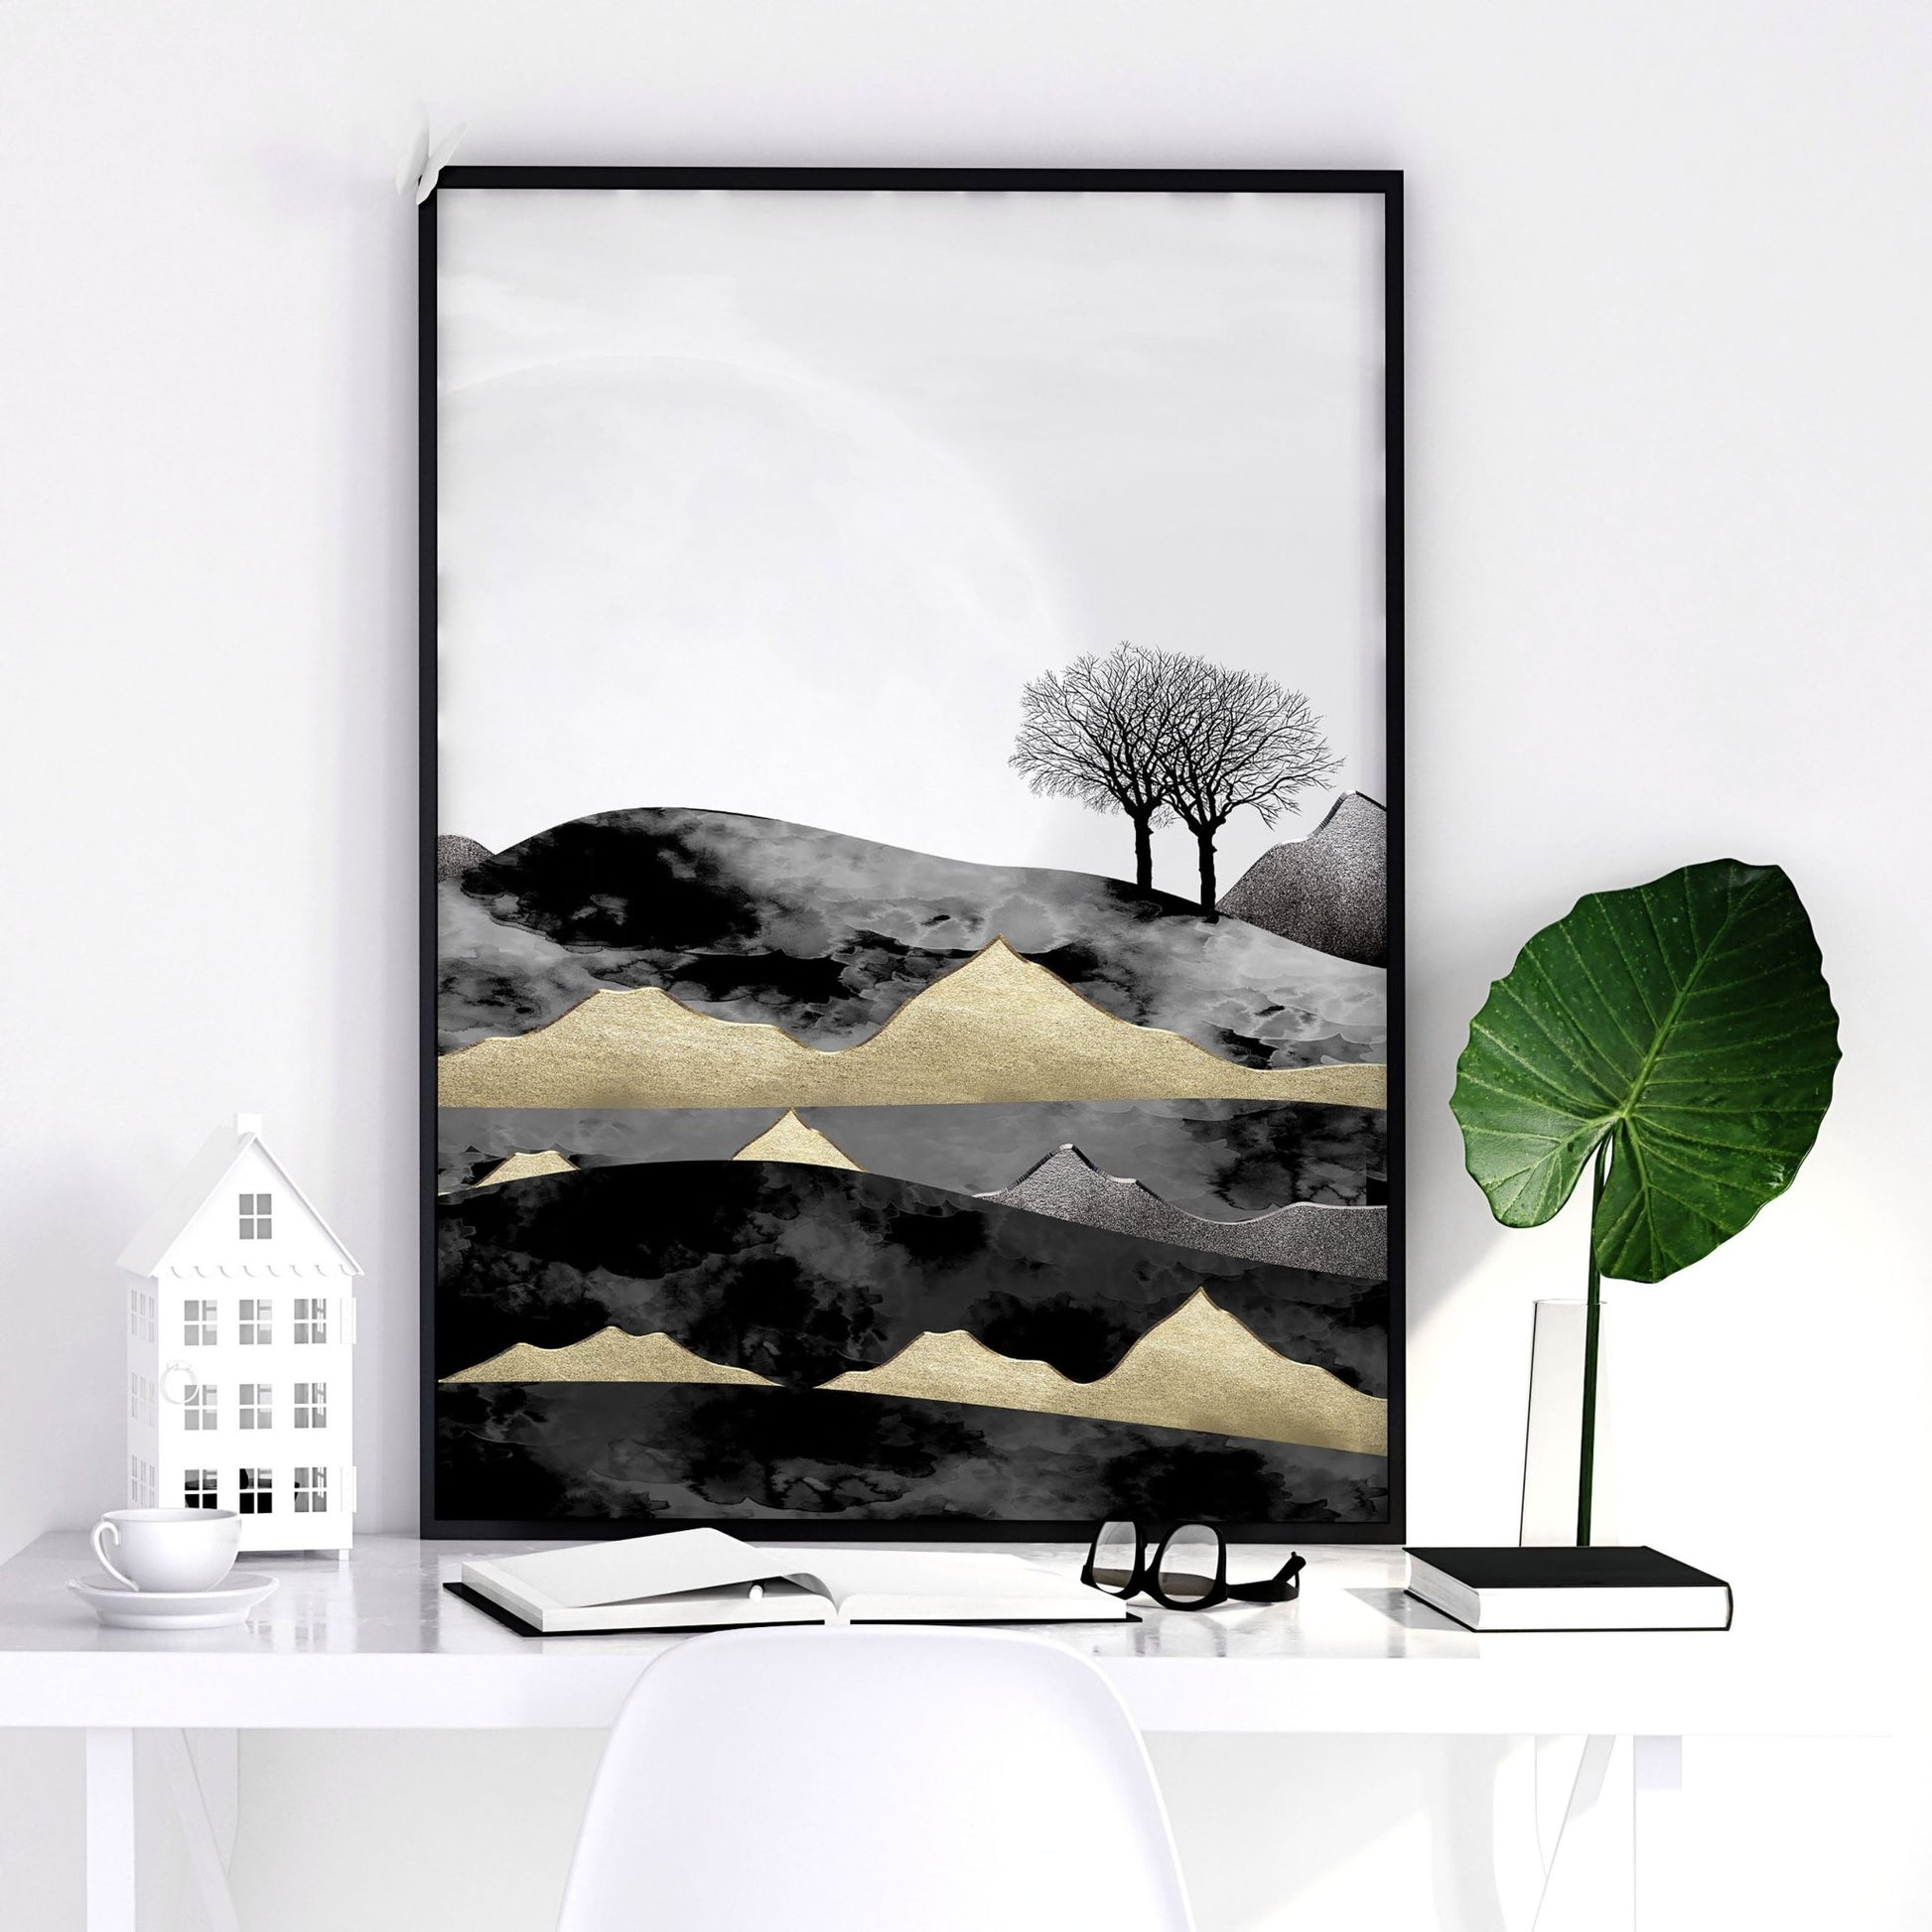 Scandinavian decorating style for office | set of 3 wall art prints - About Wall Art